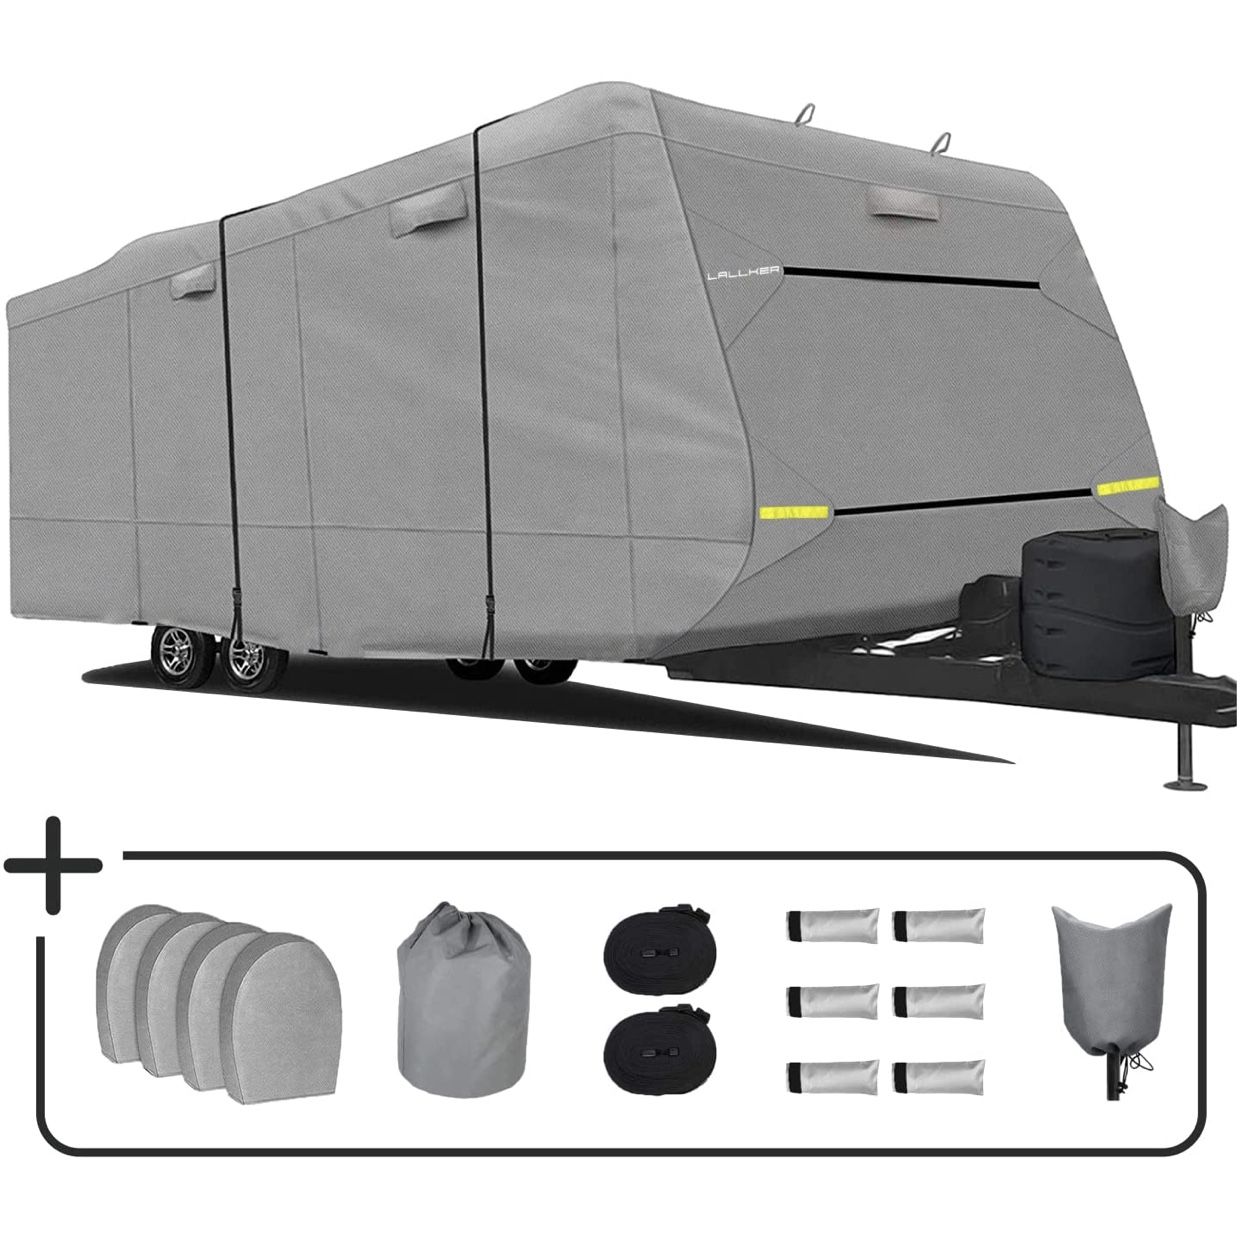 Lallker Travel Trailer RV Cover - Upgraded Heavy Duty 6 Layers Top Windproof Waterproof Sun Protection Camper RV Cover for 18'1" - 20' RV with 4 Tire 